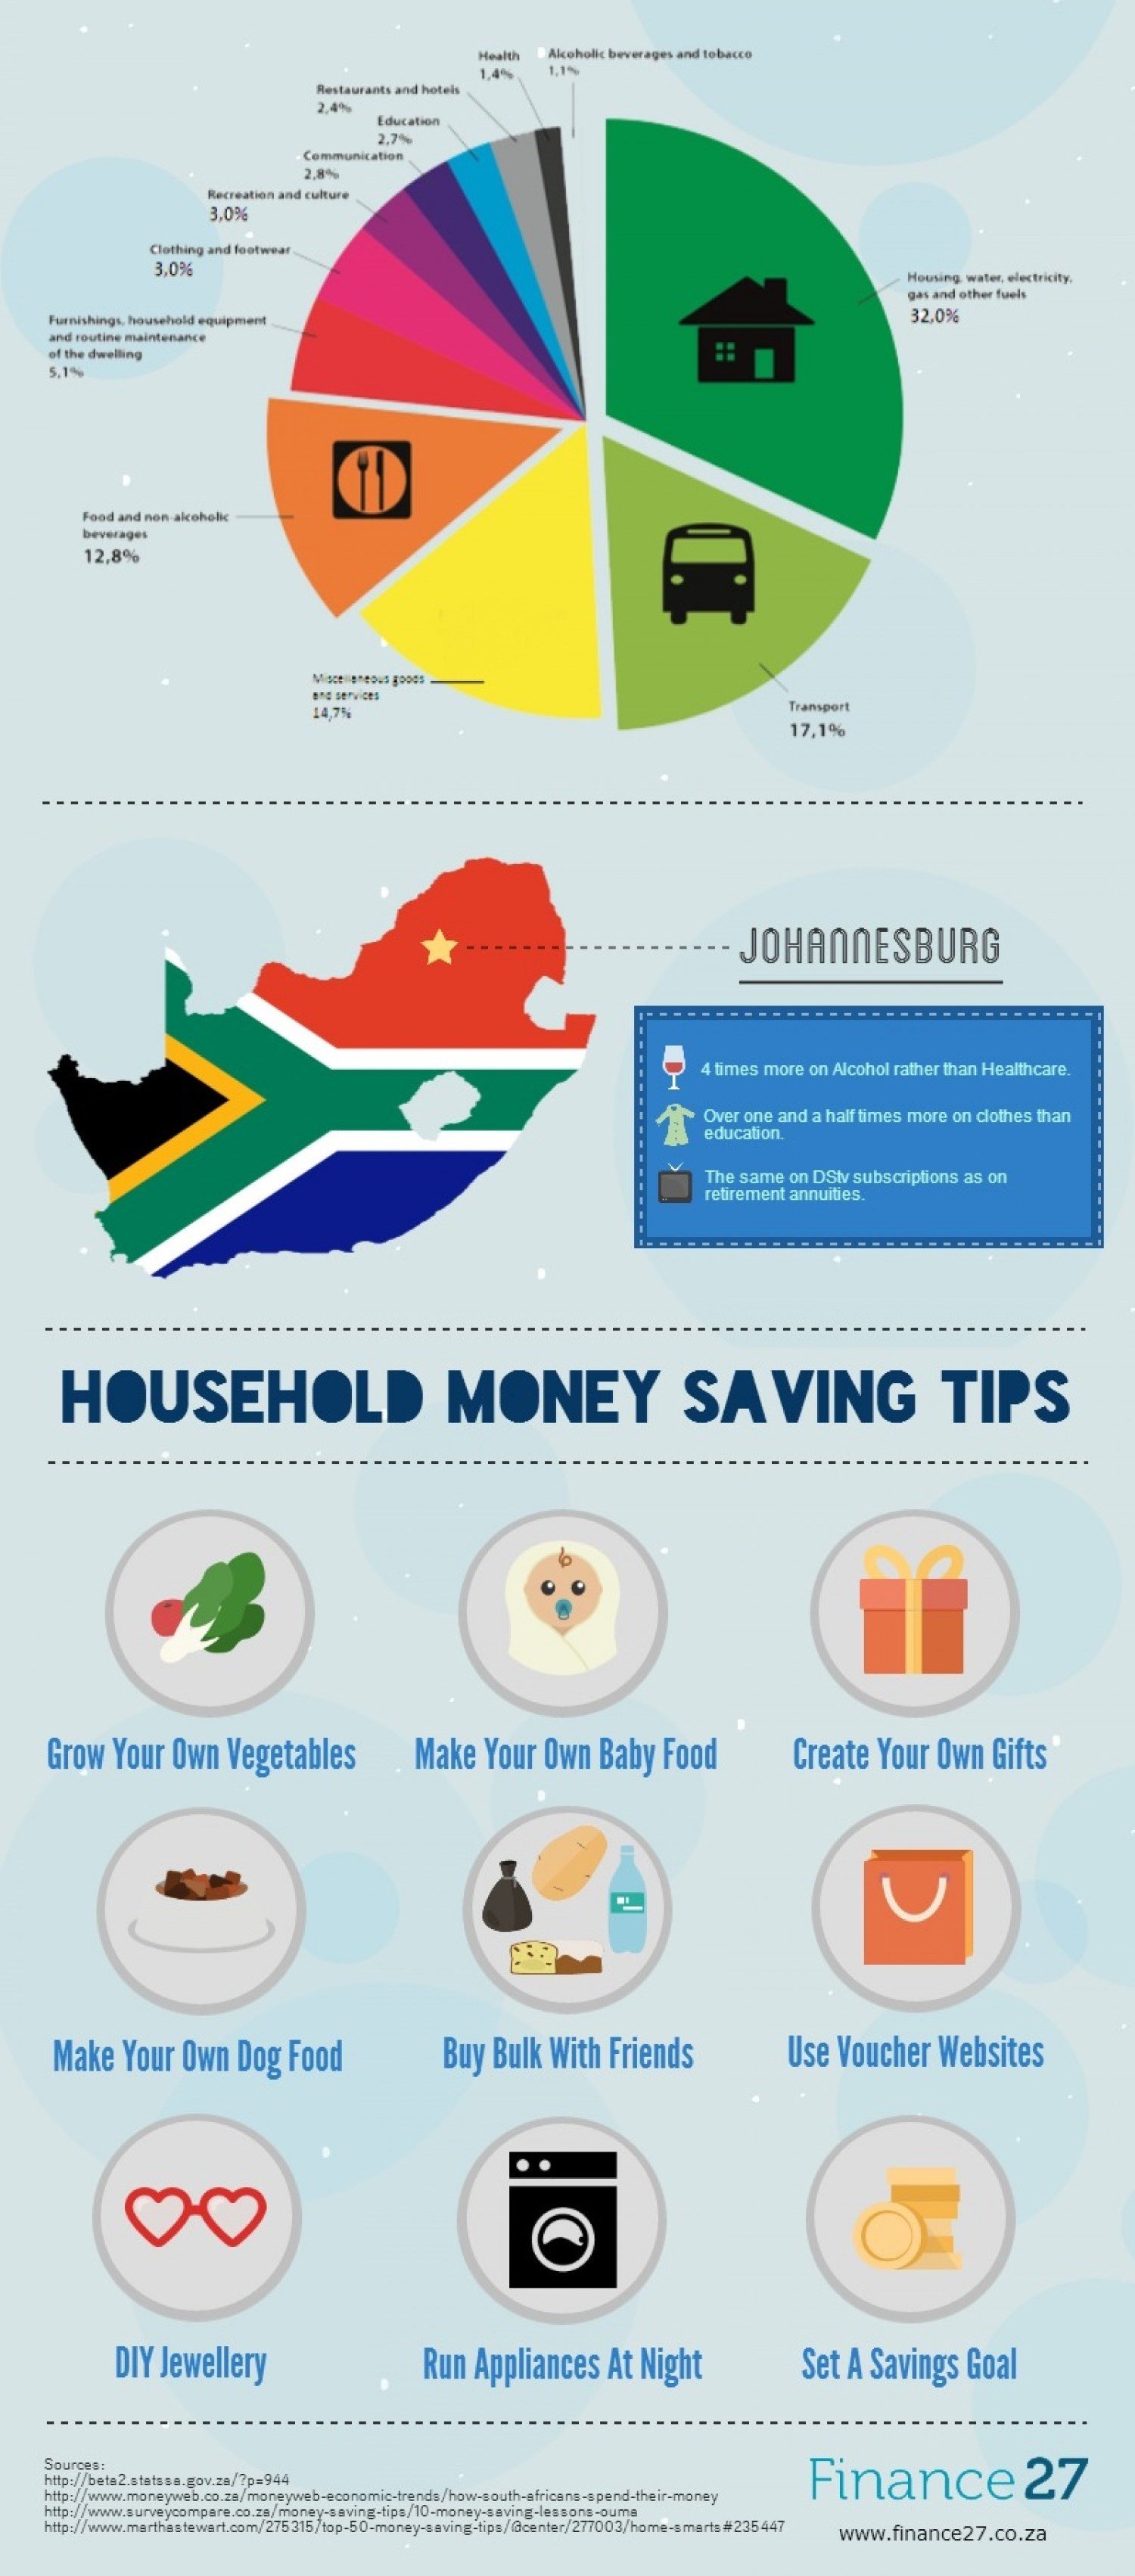 spending south africans